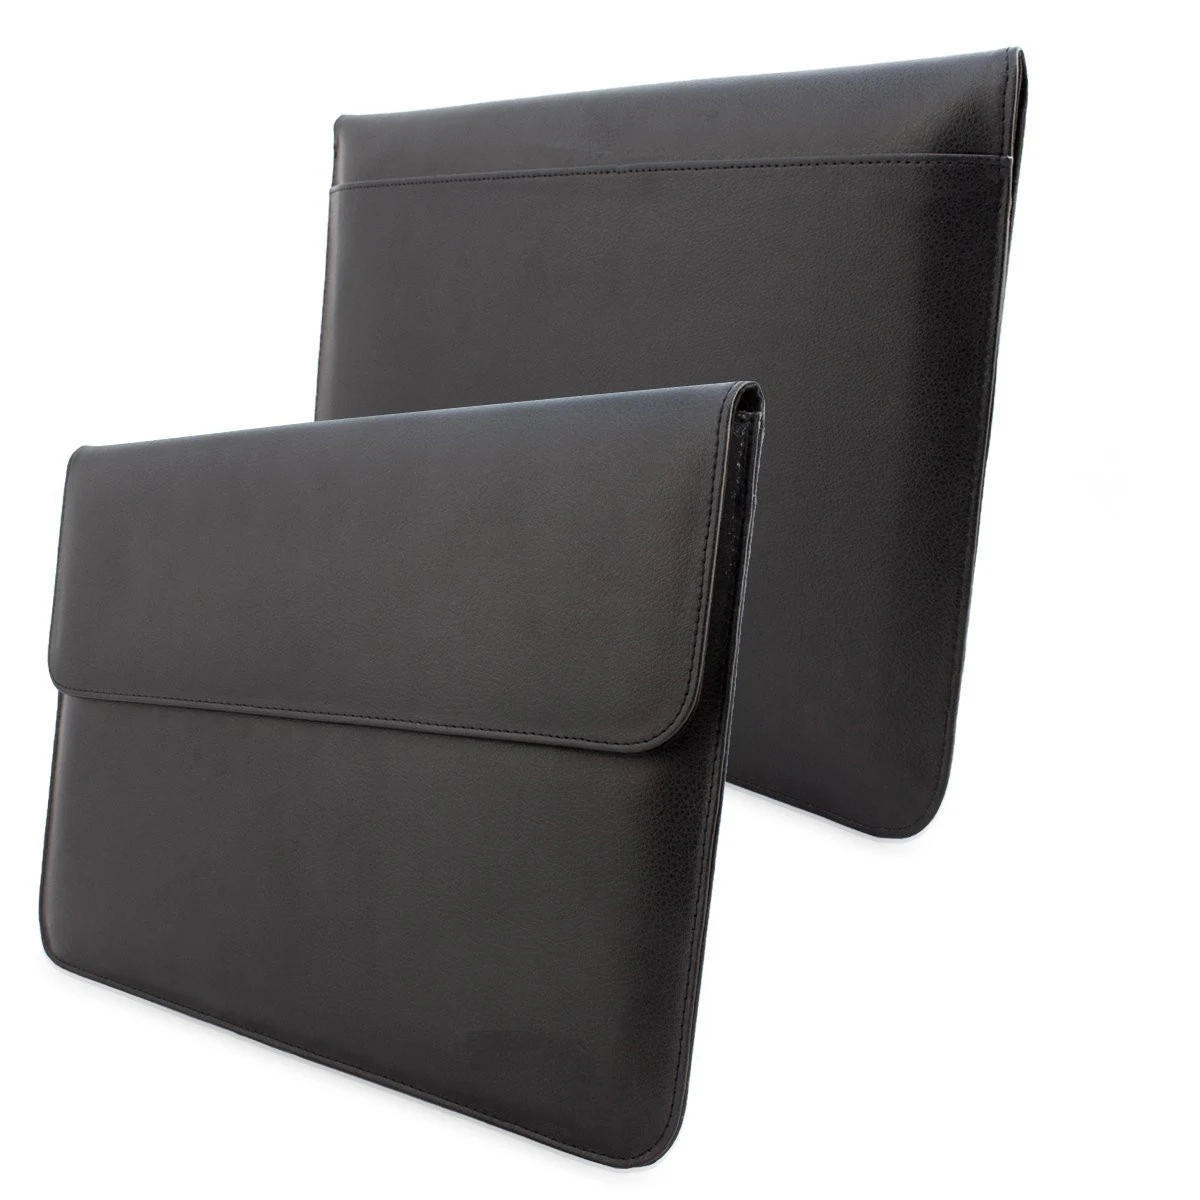  Fashion Leather Sleeve Case Bag Pouch Cover For 13" Air & Pro Retina laptop Lifetime Guarantee 